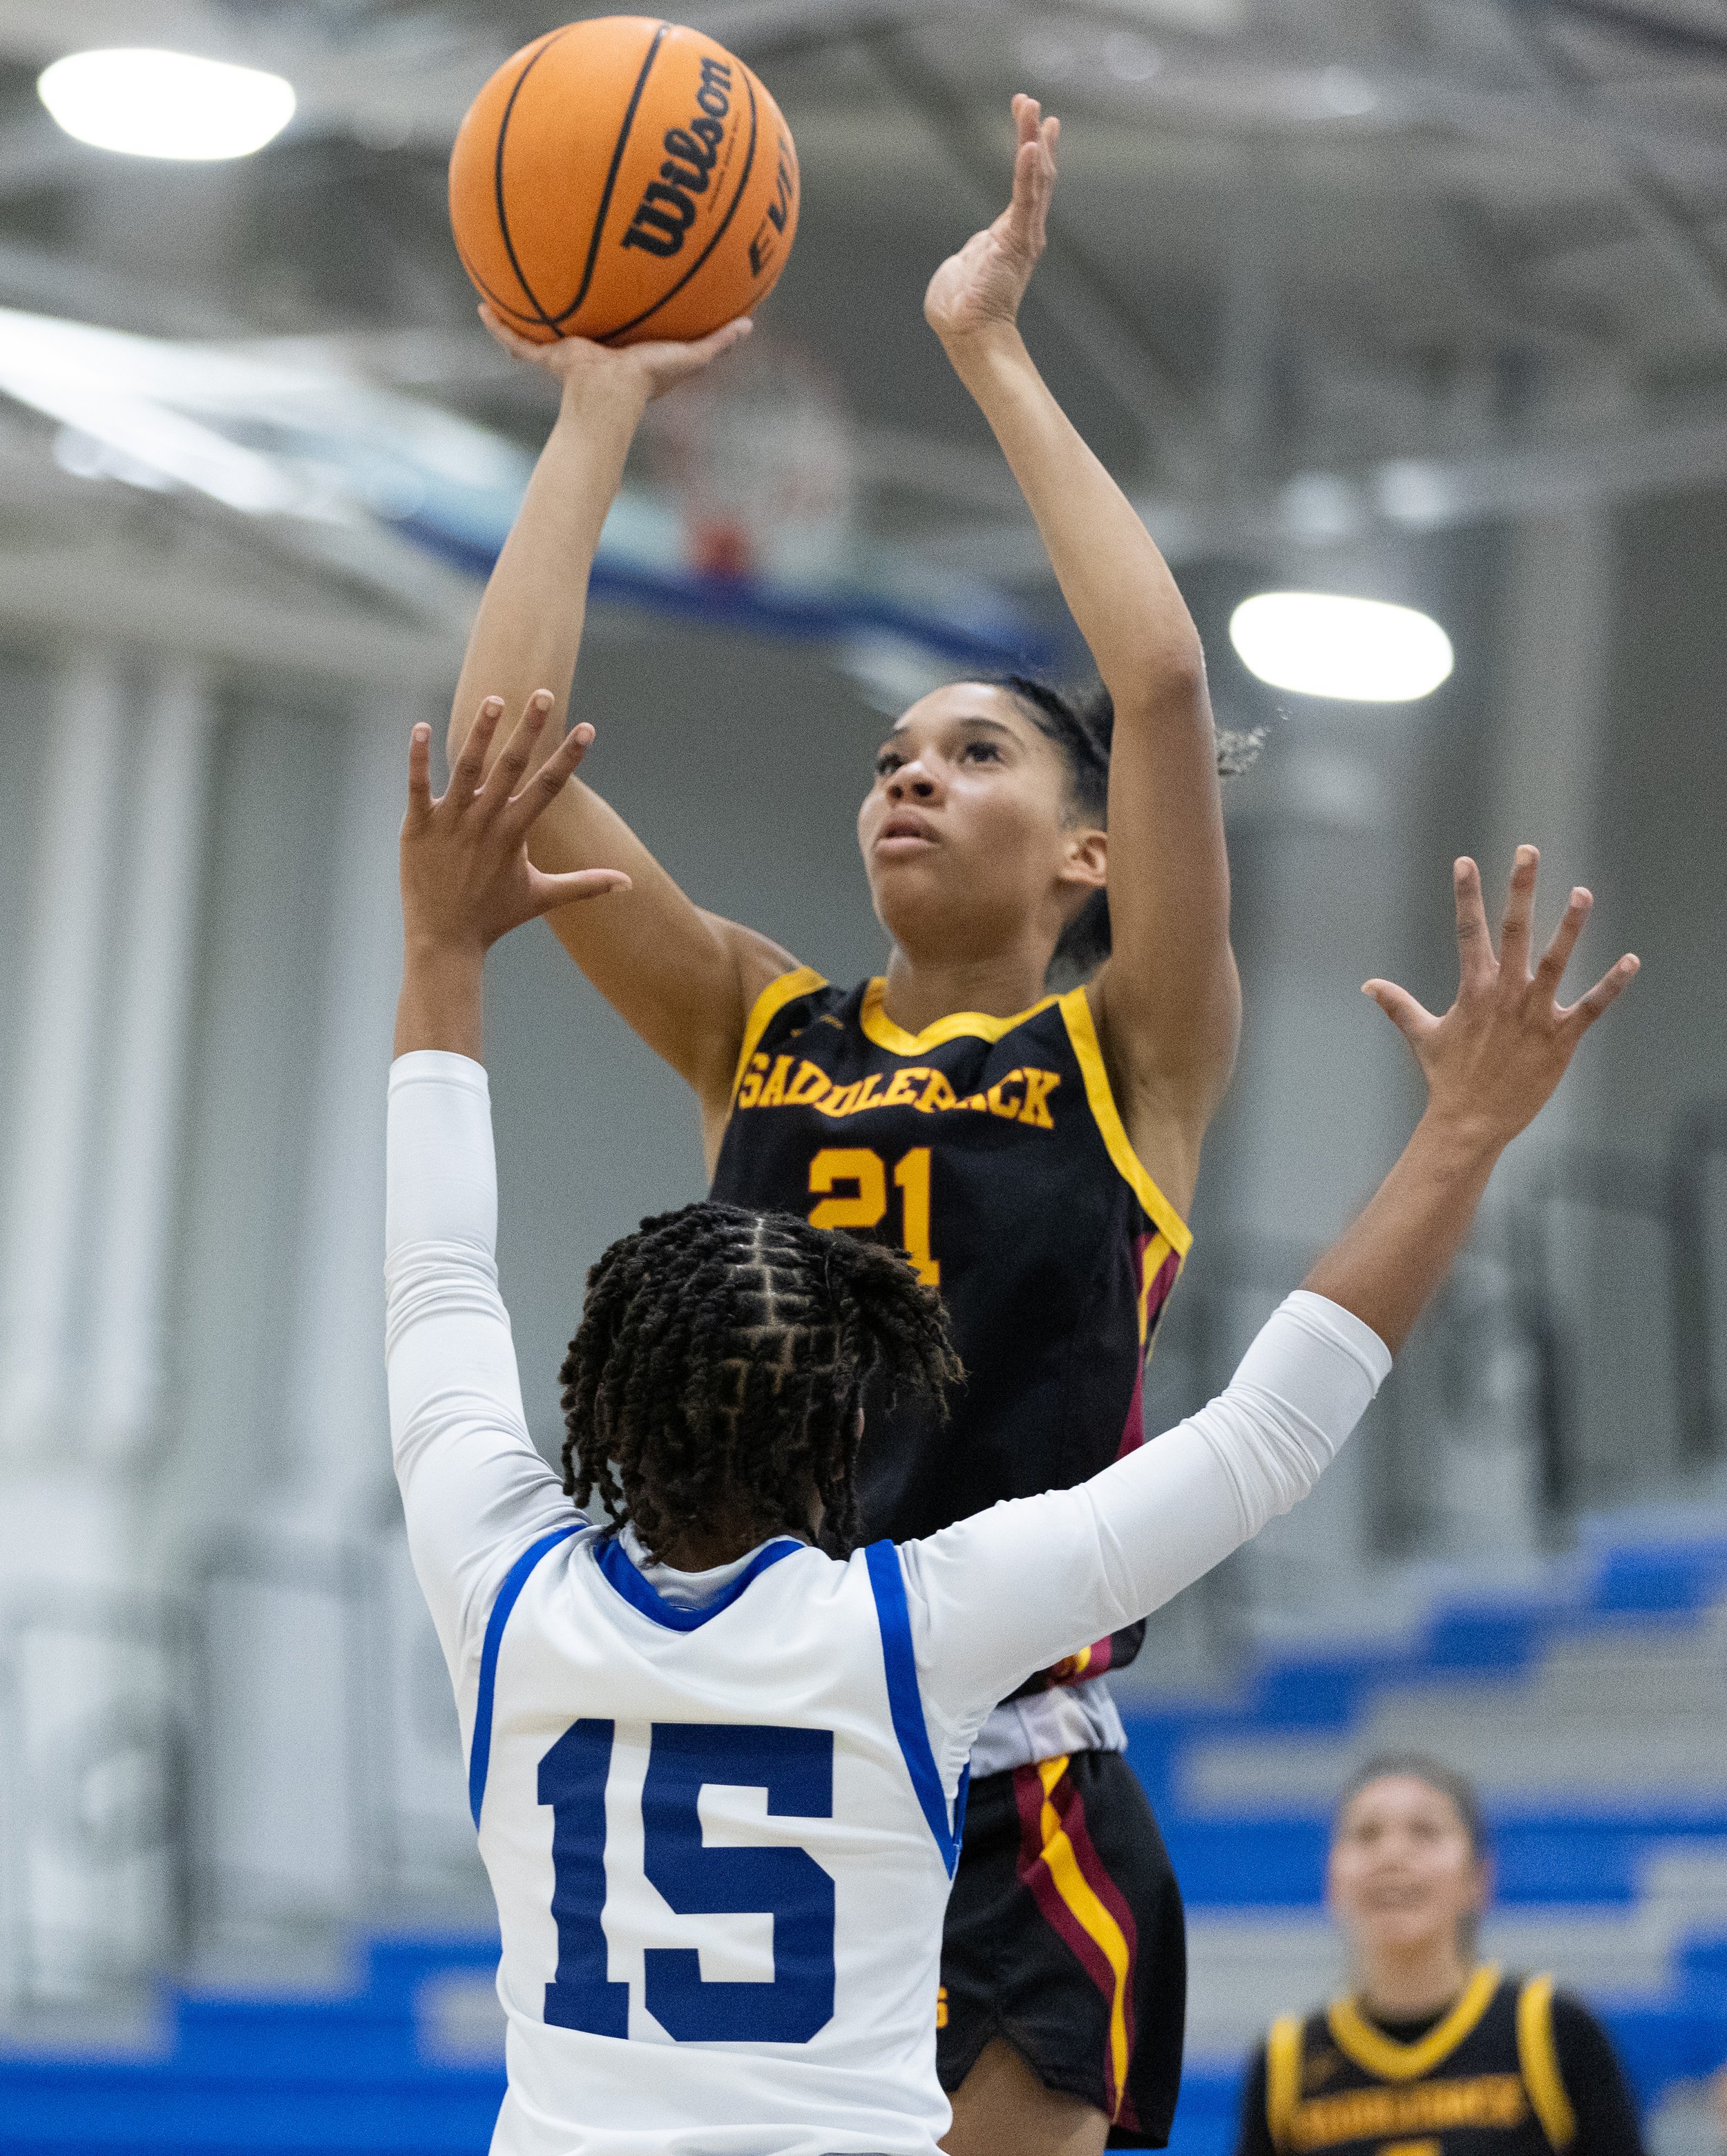  Alex Surrena-Thompson(21) from Saddleback Callege taking a shot to net as Santa Monica College(SMC) Corsair Jaiyahne Henderson(15) attempts to block the shot in the SMC Pavillion Gym at Santa Monica, Calif. Corsairs lost 62-50 to put them in a 3-gam